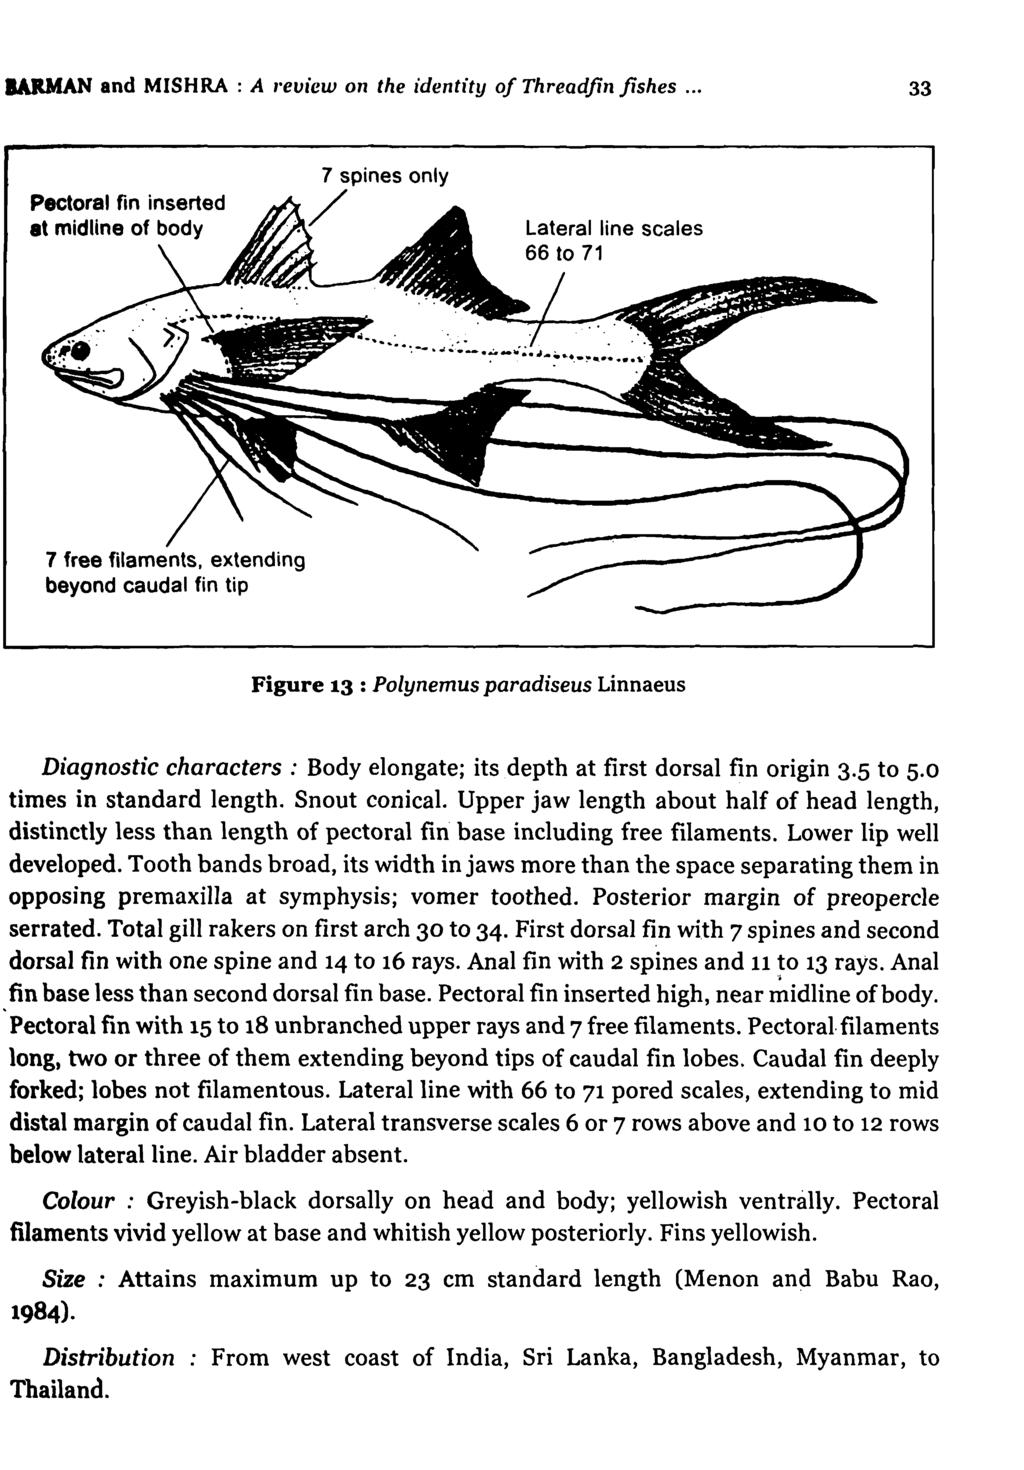 BARMAN and MISHRA : A "evicw on the identity of Threadfin fishes... 33 Pectoral fin inserted at midline of body 7 spines only / Lateral line scales 66 to 71 7 free filaments.